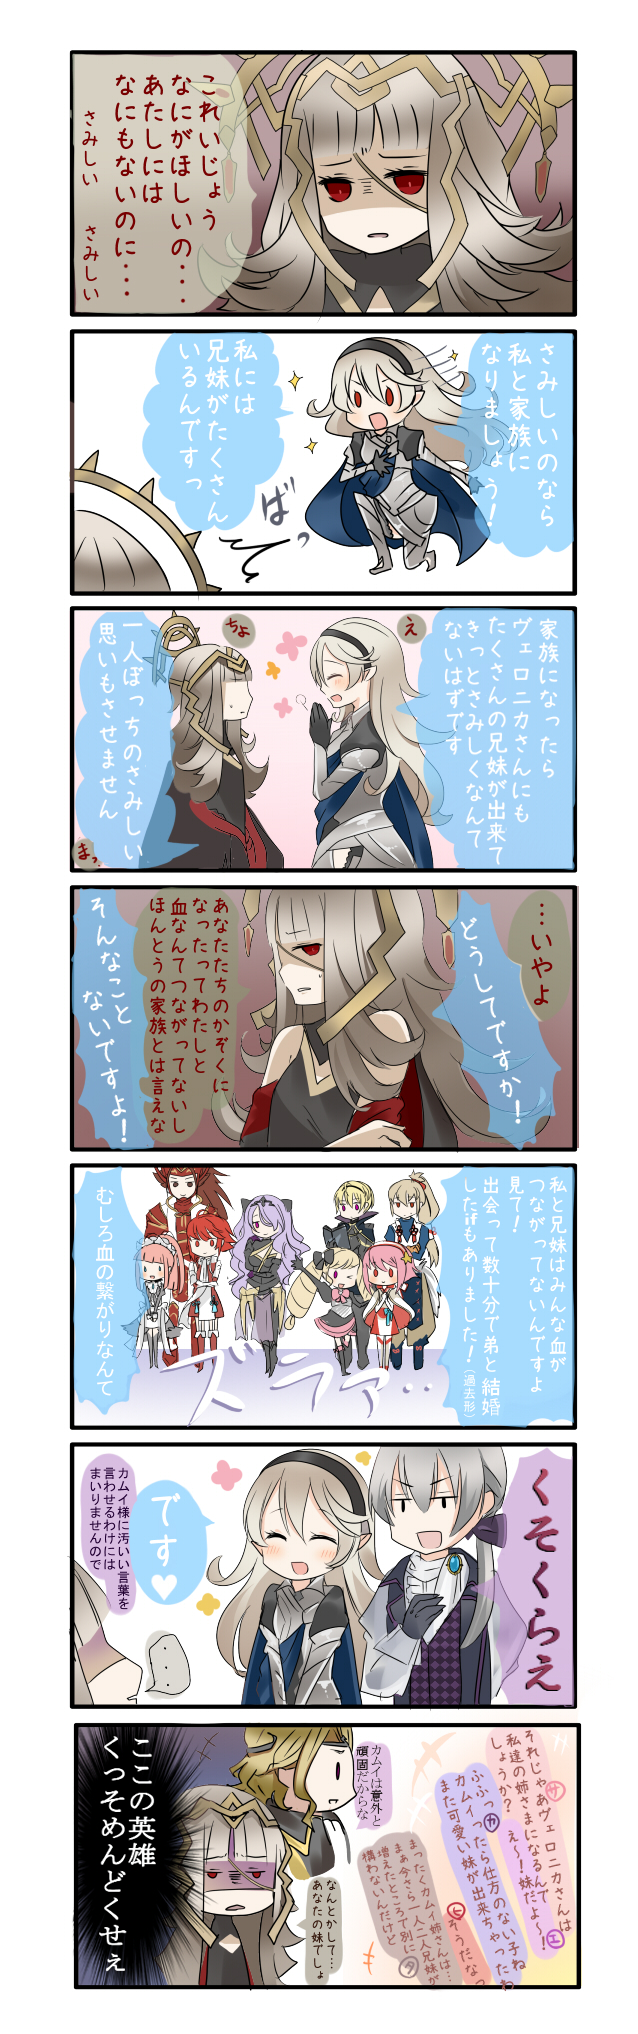 5boys 6+girls armor blonde_hair bow brother_and_sister brothers brown_hair camilla_(fire_emblem_if) circlet closed_eyes comic crown dress elise_(fire_emblem_if) felicia_(fire_emblem_if) female_my_unit_(fire_emblem_if) fire_emblem fire_emblem_heroes fire_emblem_if from_side grey_hair hair_bow hair_over_one_eye hairband highres hinoka_(fire_emblem_if) joker_(fire_emblem_if) leon_(fire_emblem_if) long_hair marks_(fire_emblem_if) multiple_boys multiple_girls my_unit_(fire_emblem_if) open_mouth pink_hair ponytail purple_hair red_eyes redhead rojiura-cat ryouma_(fire_emblem_if) sakura_(fire_emblem_if) short_hair siblings sisters takumi_(fire_emblem_if) tiara translation_request twintails veronica_(fire_emblem)